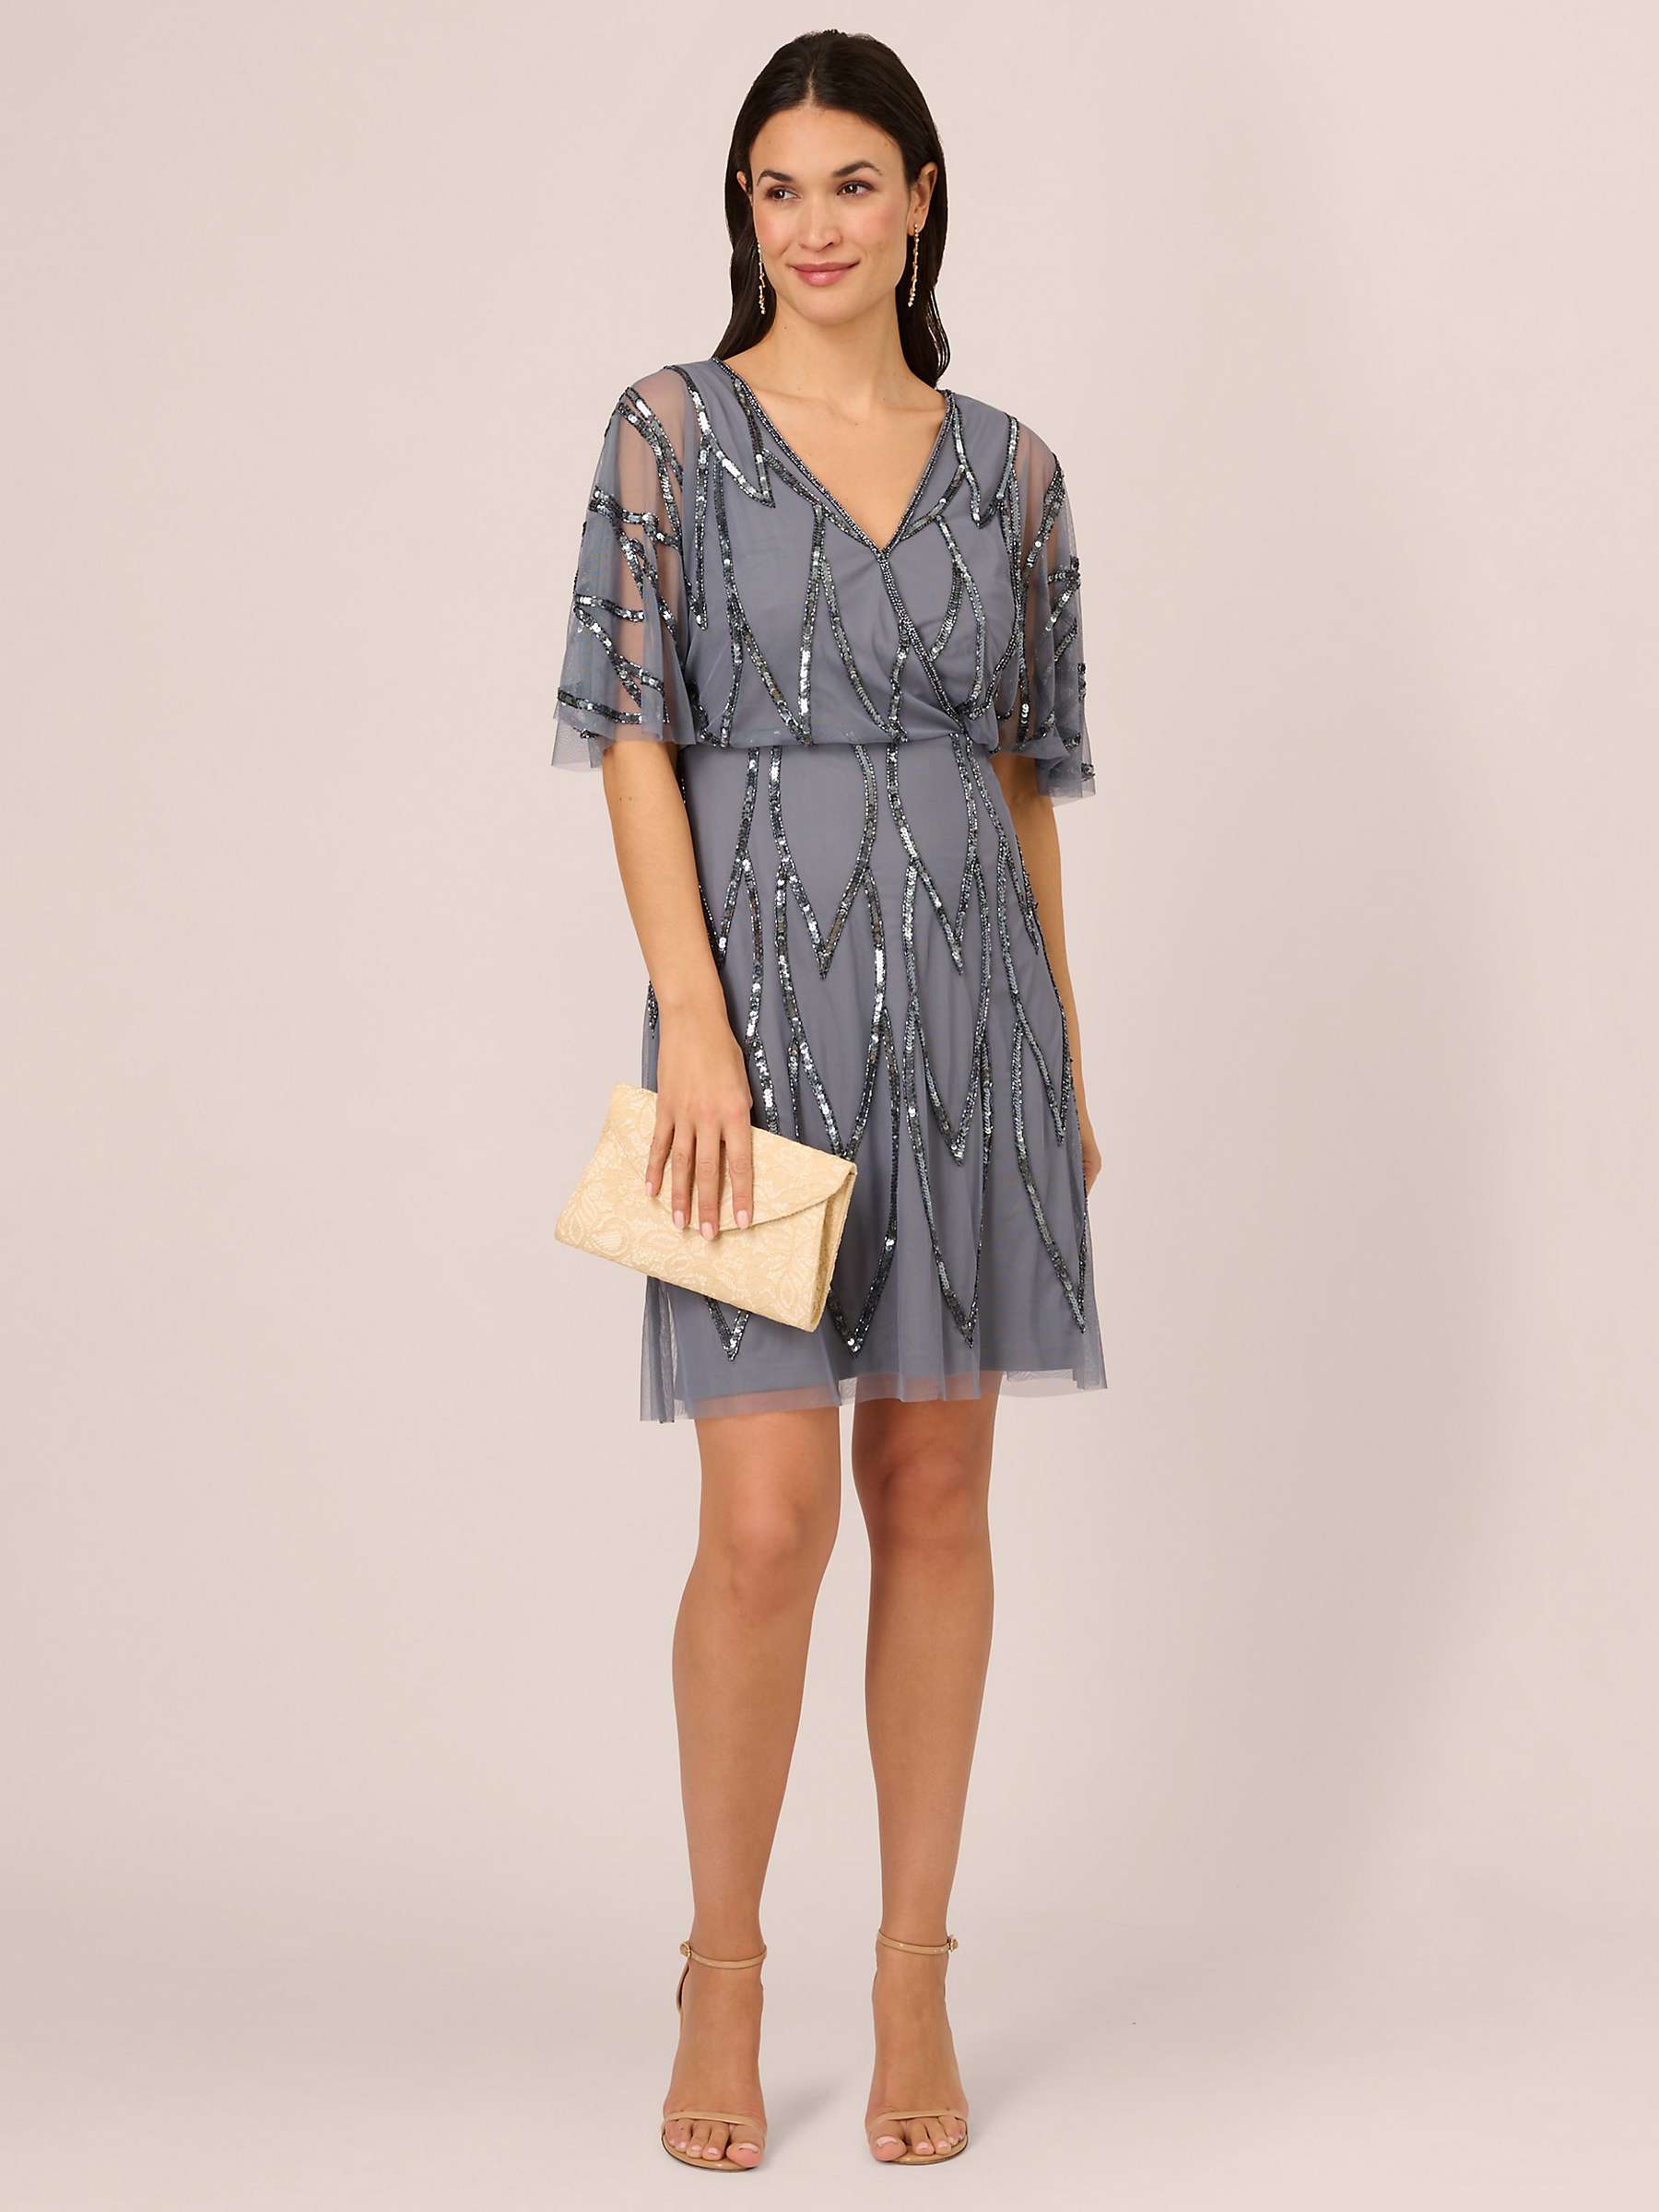 Buy Adrianna Papell Papell Studio Beaded Mesh Wrap Dress, Dusty Blue Online at johnlewis.com